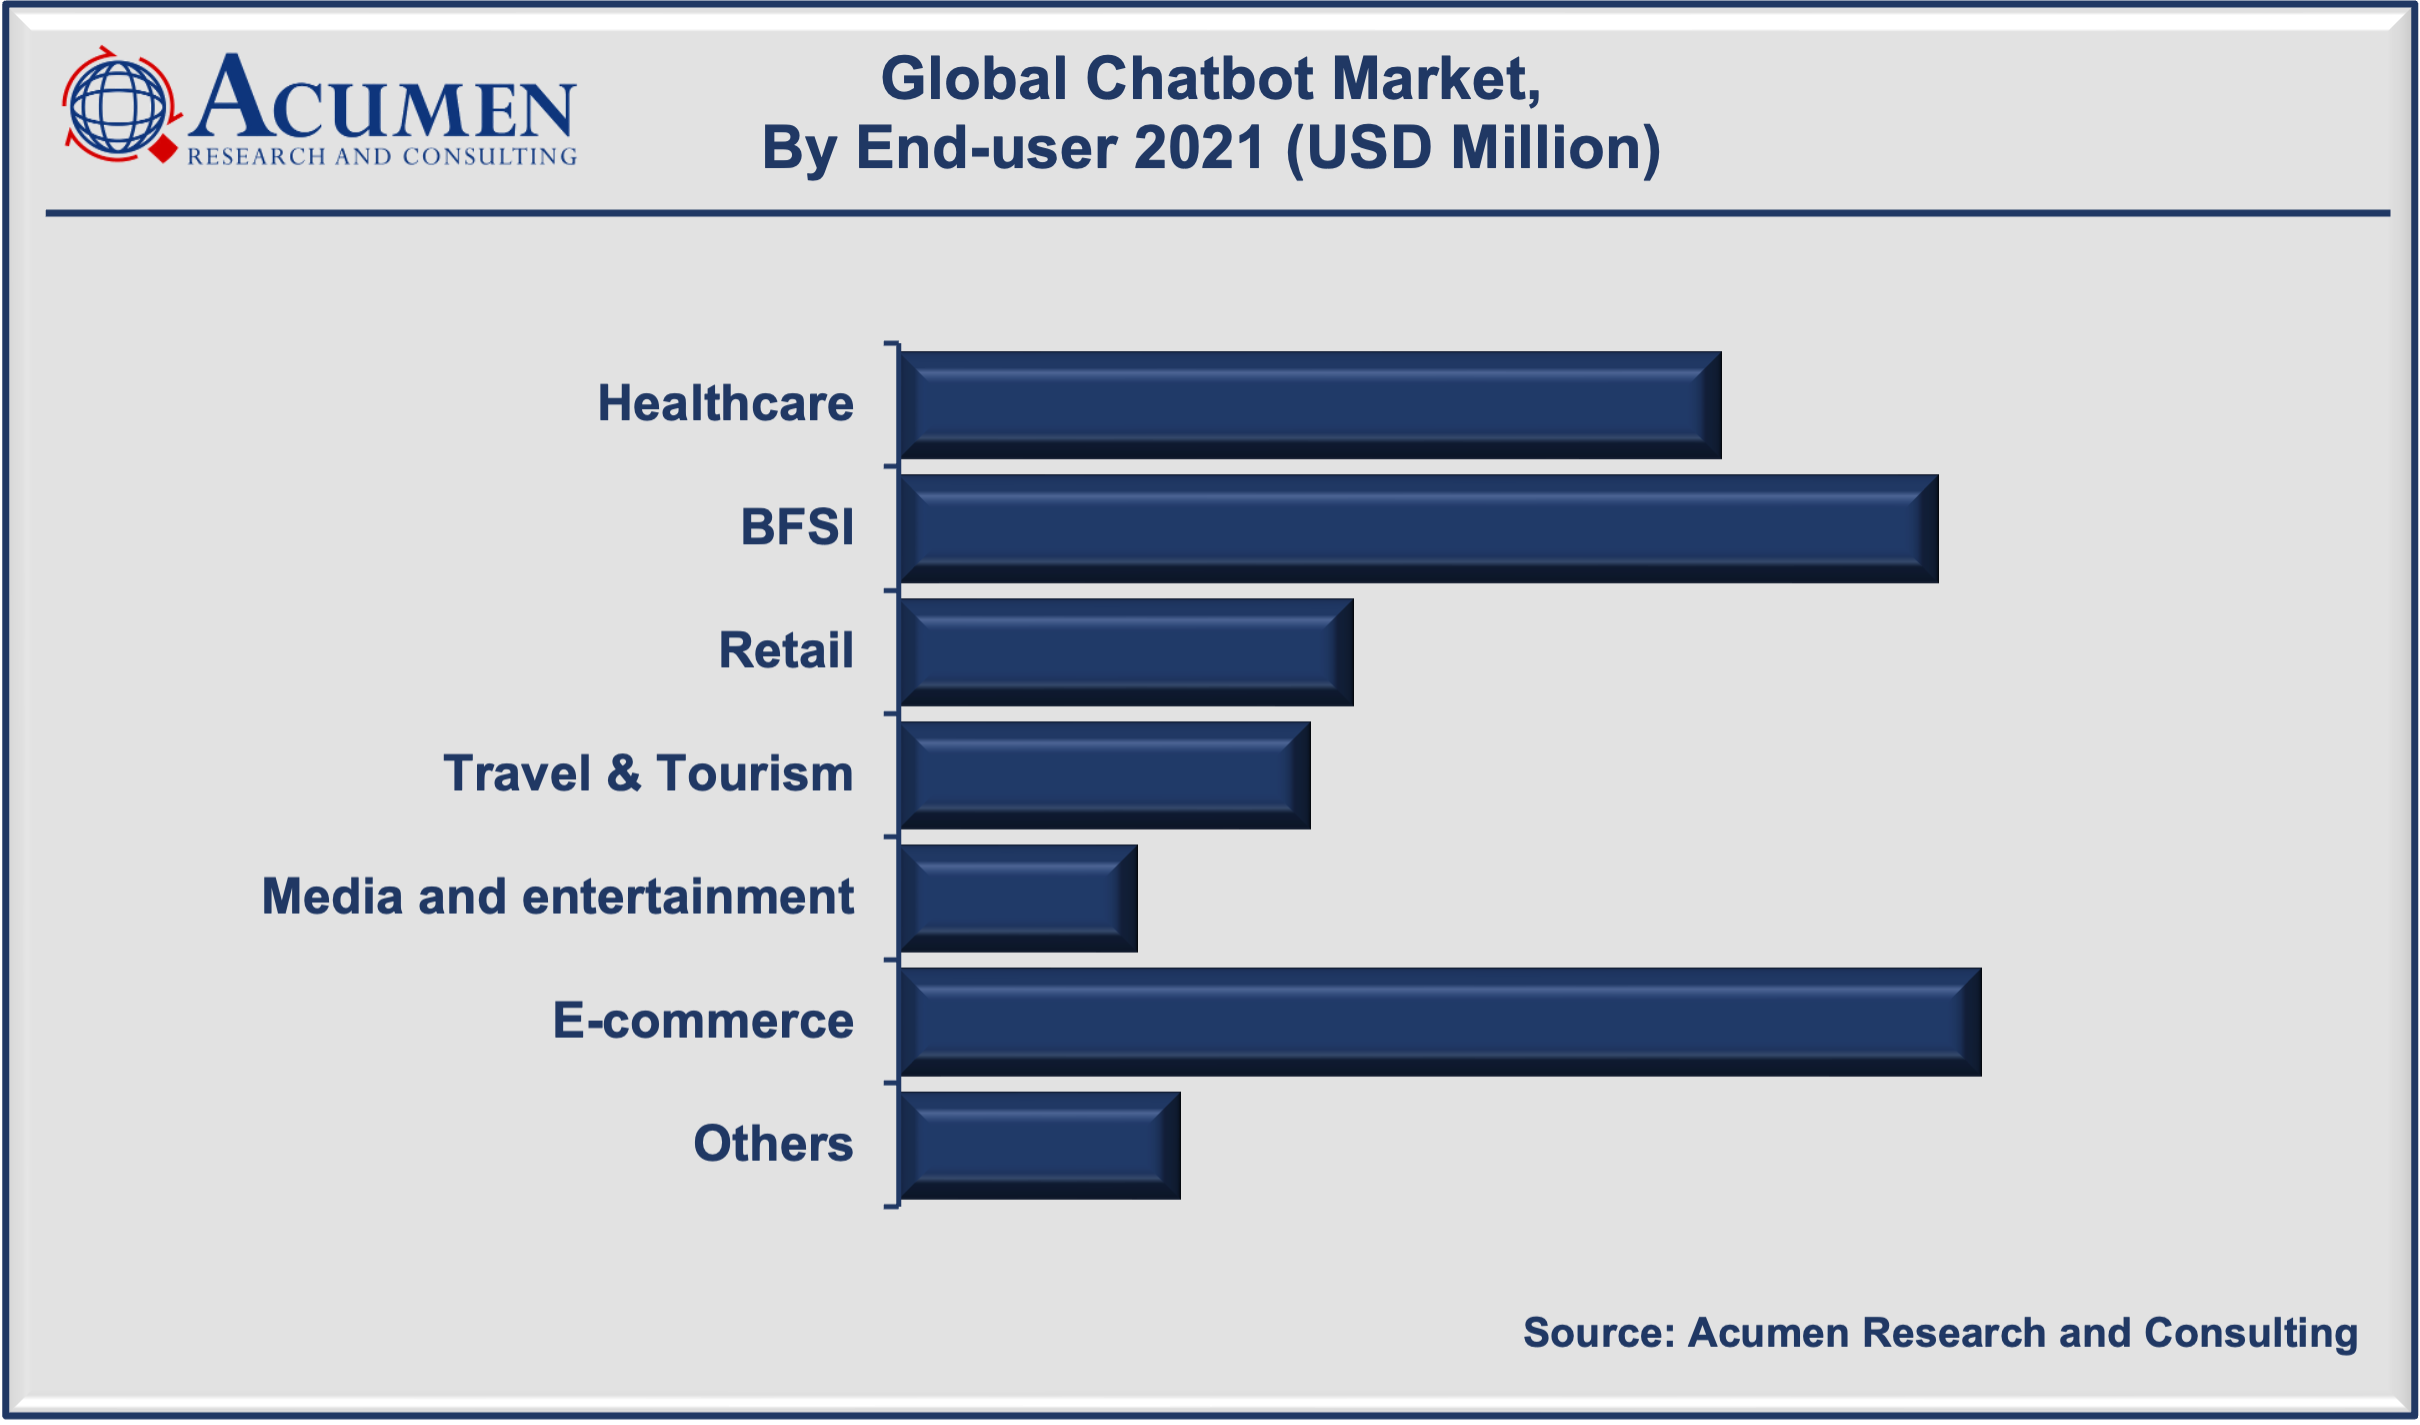 Chatbot Market size accounted for USD 521 Million in 2021 and is expected to reach USD 3,411 Million by 2030 growing at a CAGR of 23.7% during the forecast period from 2022 to 2030.